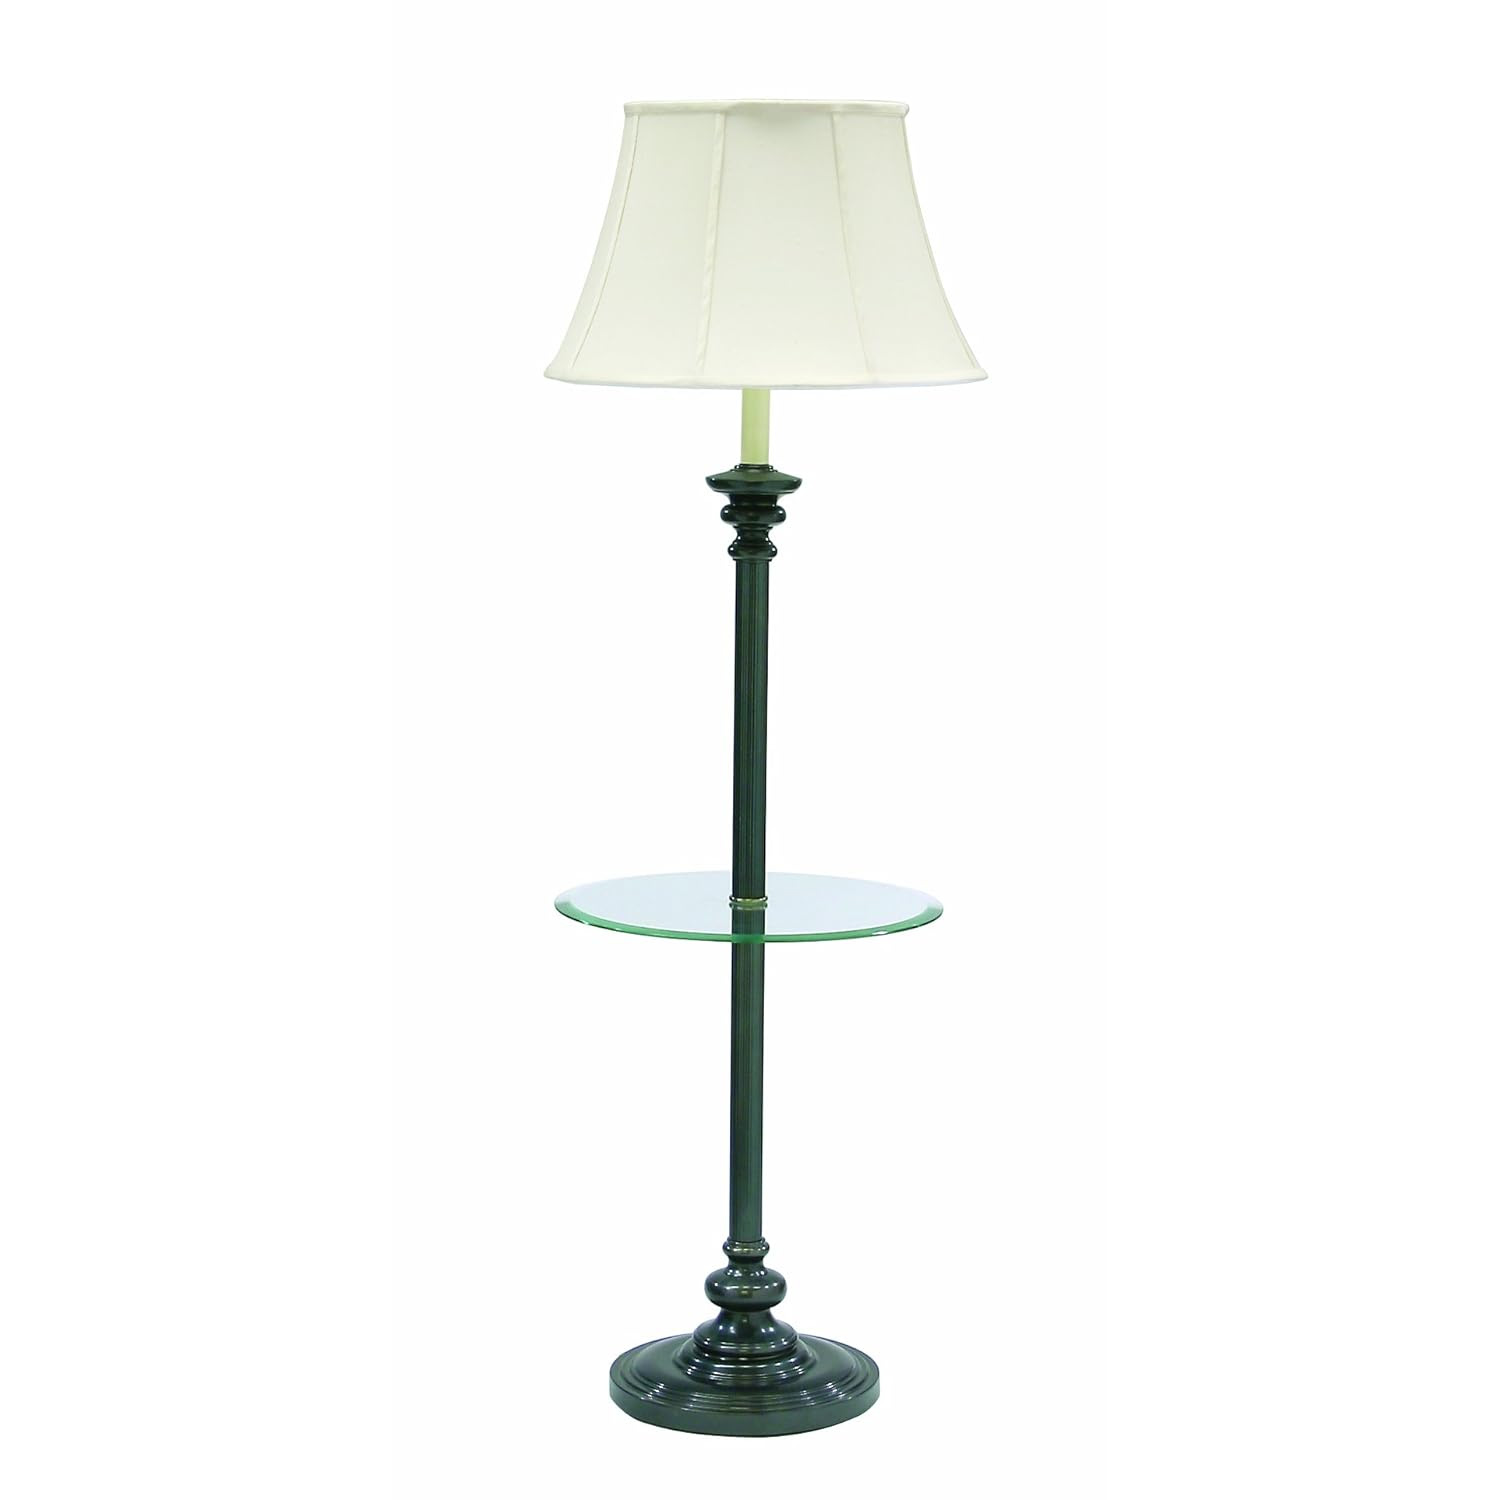 Floor Lamp With Table Attached